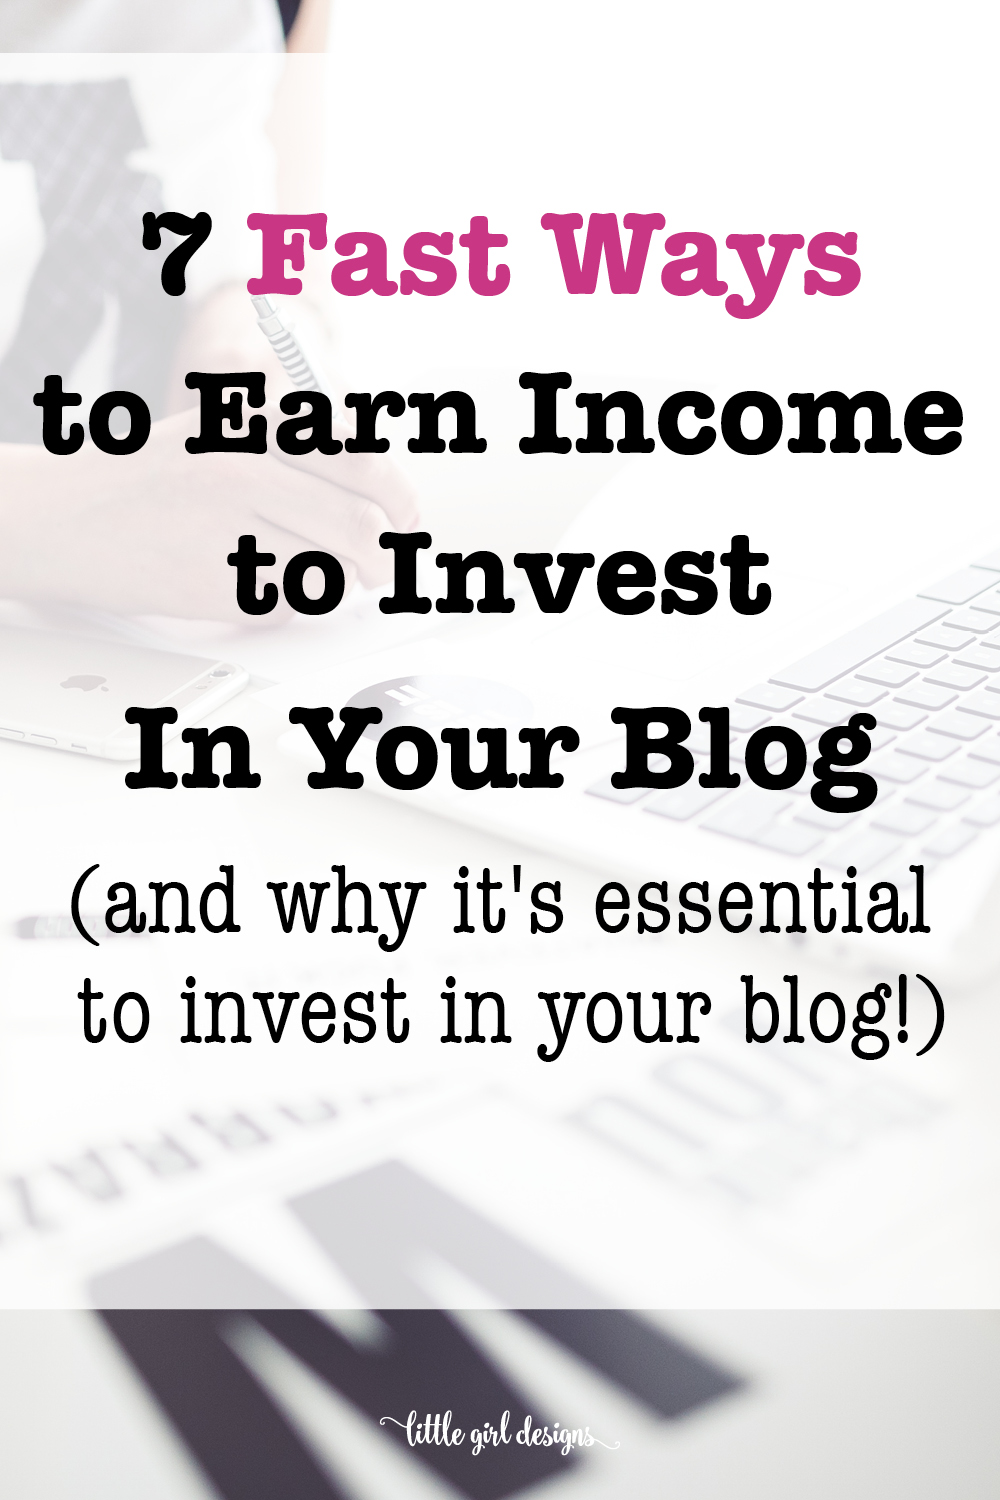 7 Fast Ways to Earn Income to Invest In Your Blog